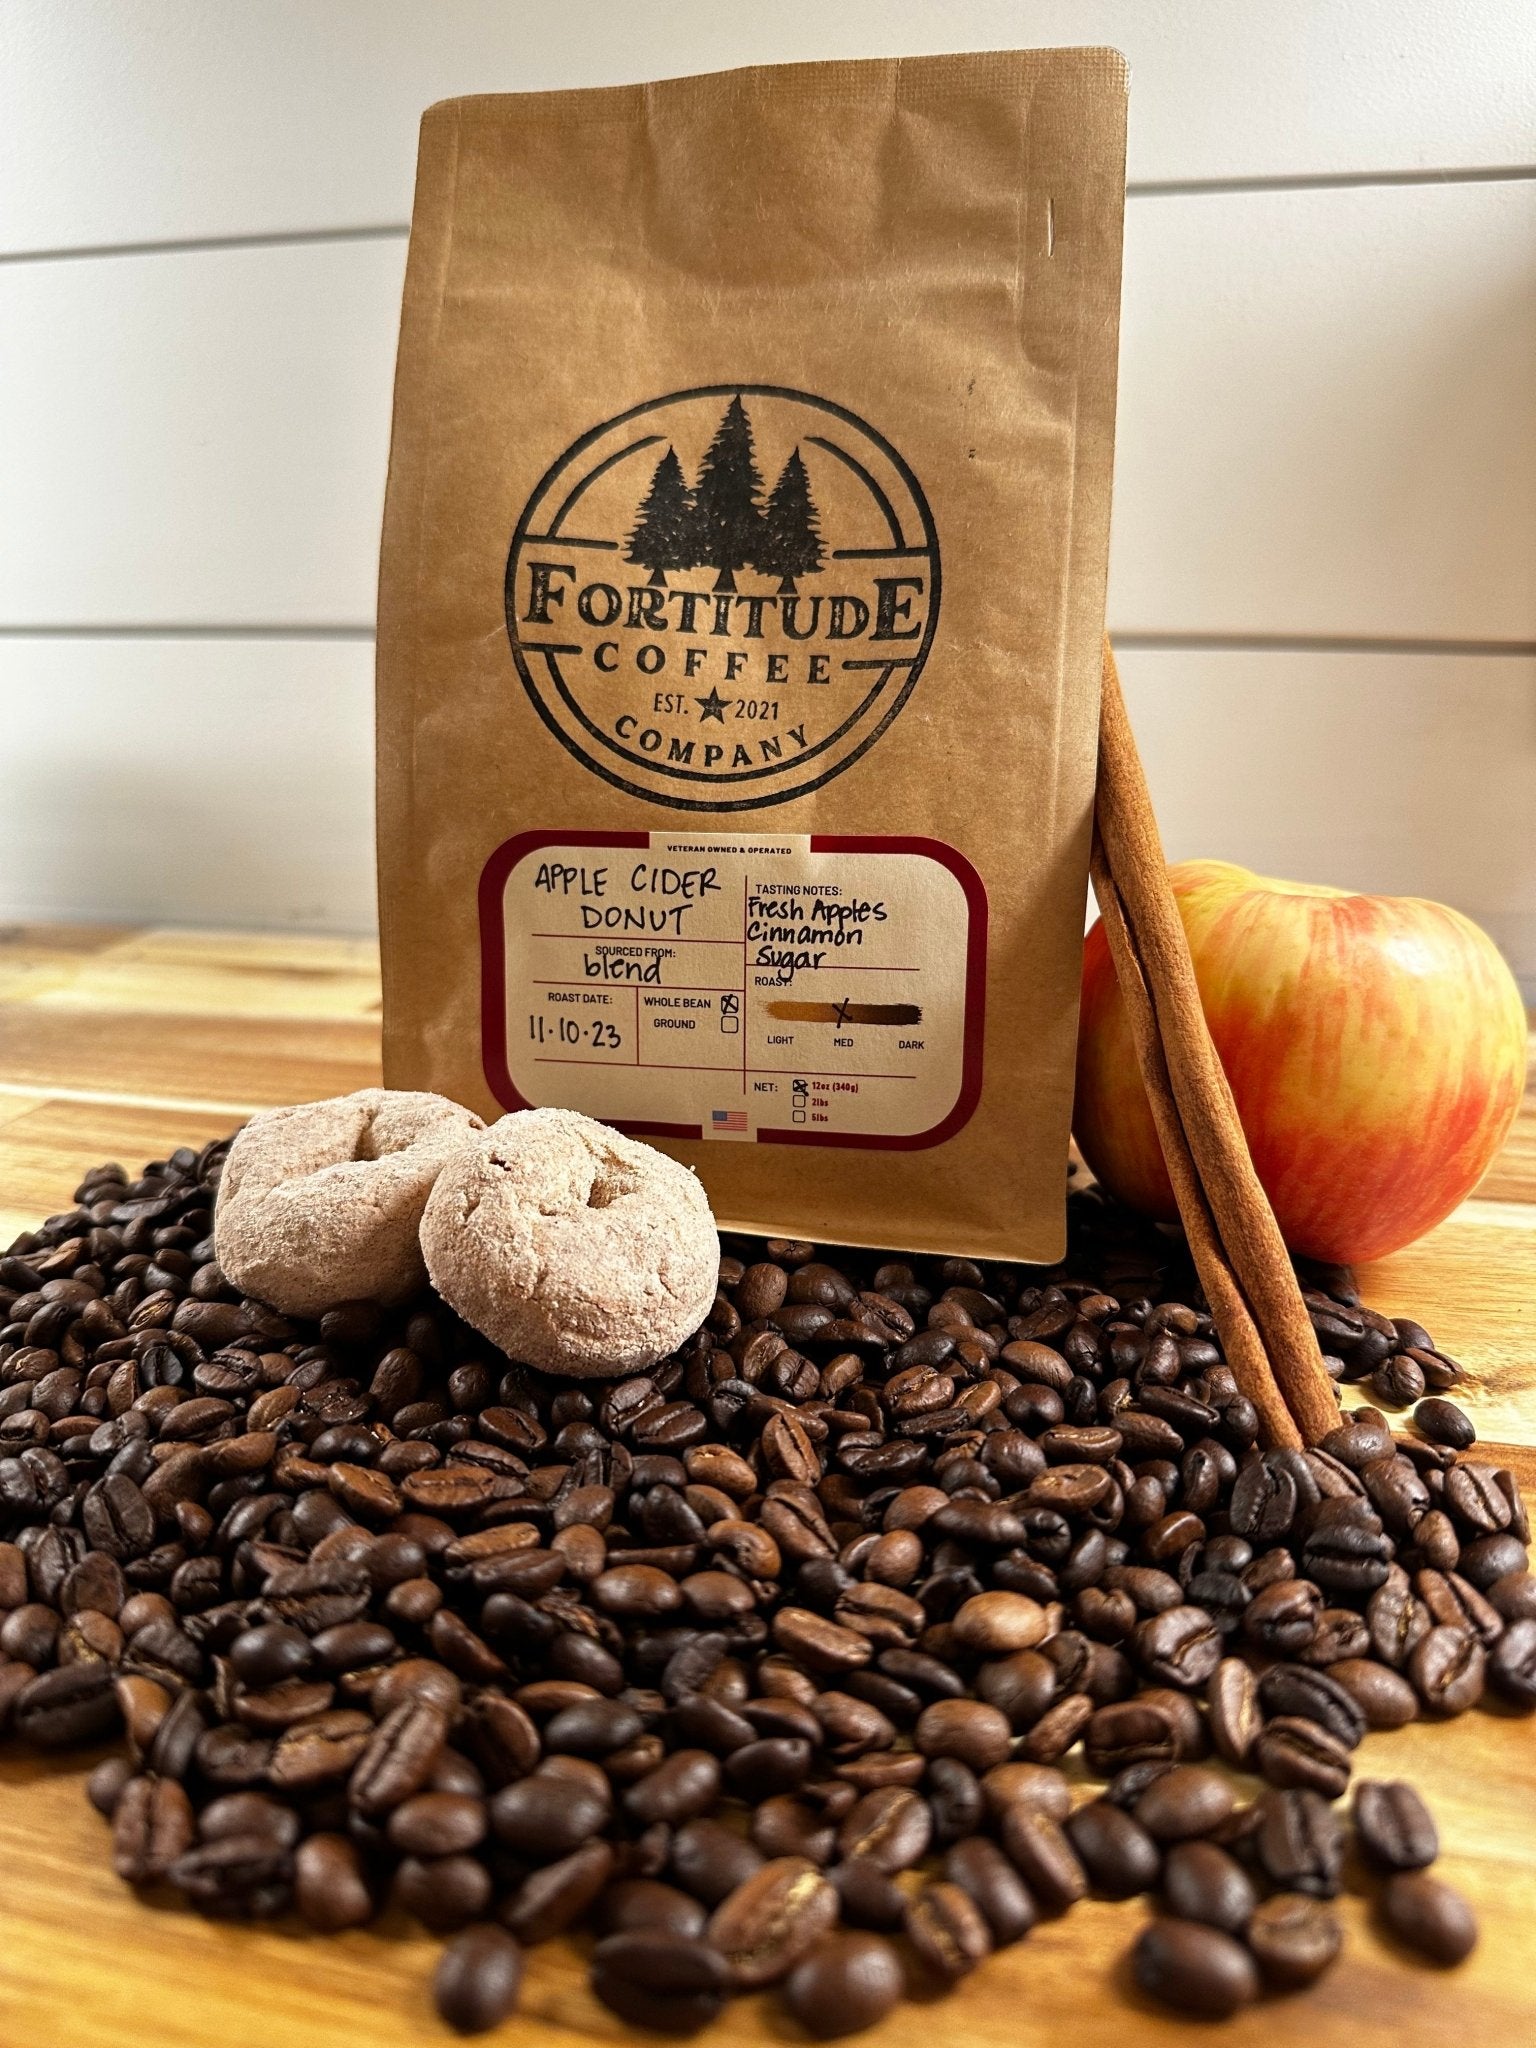 Apple Cider Donut - Fortitude Coffee Co